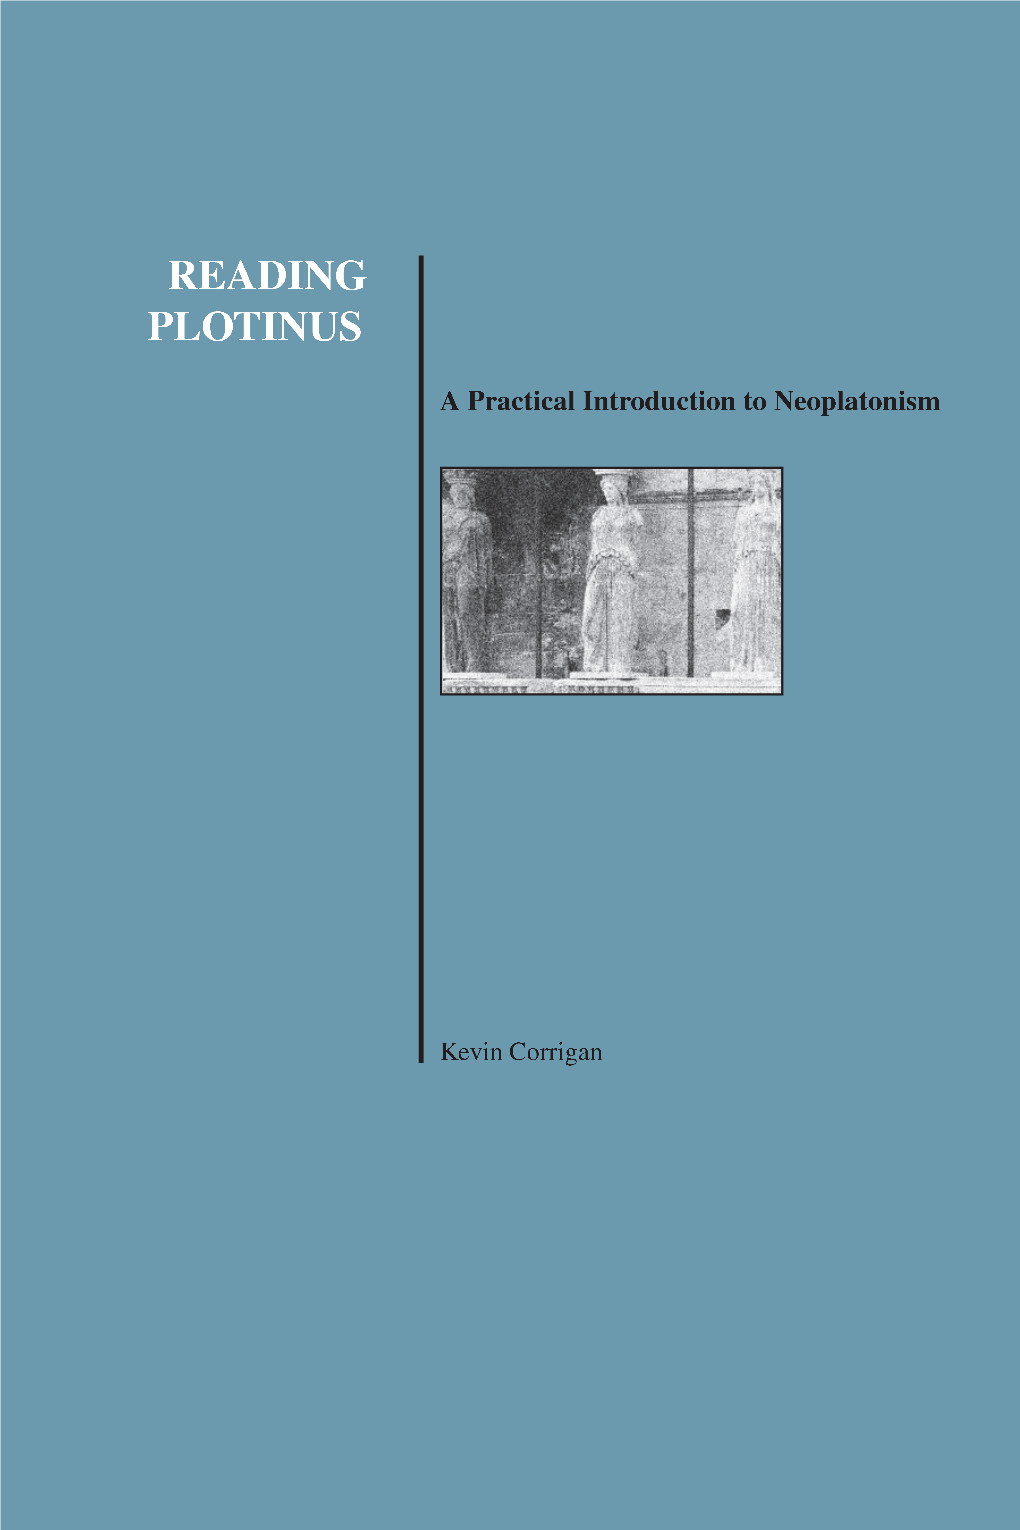 Reading Plotinus: a Practical Introduction to Neoplatonism